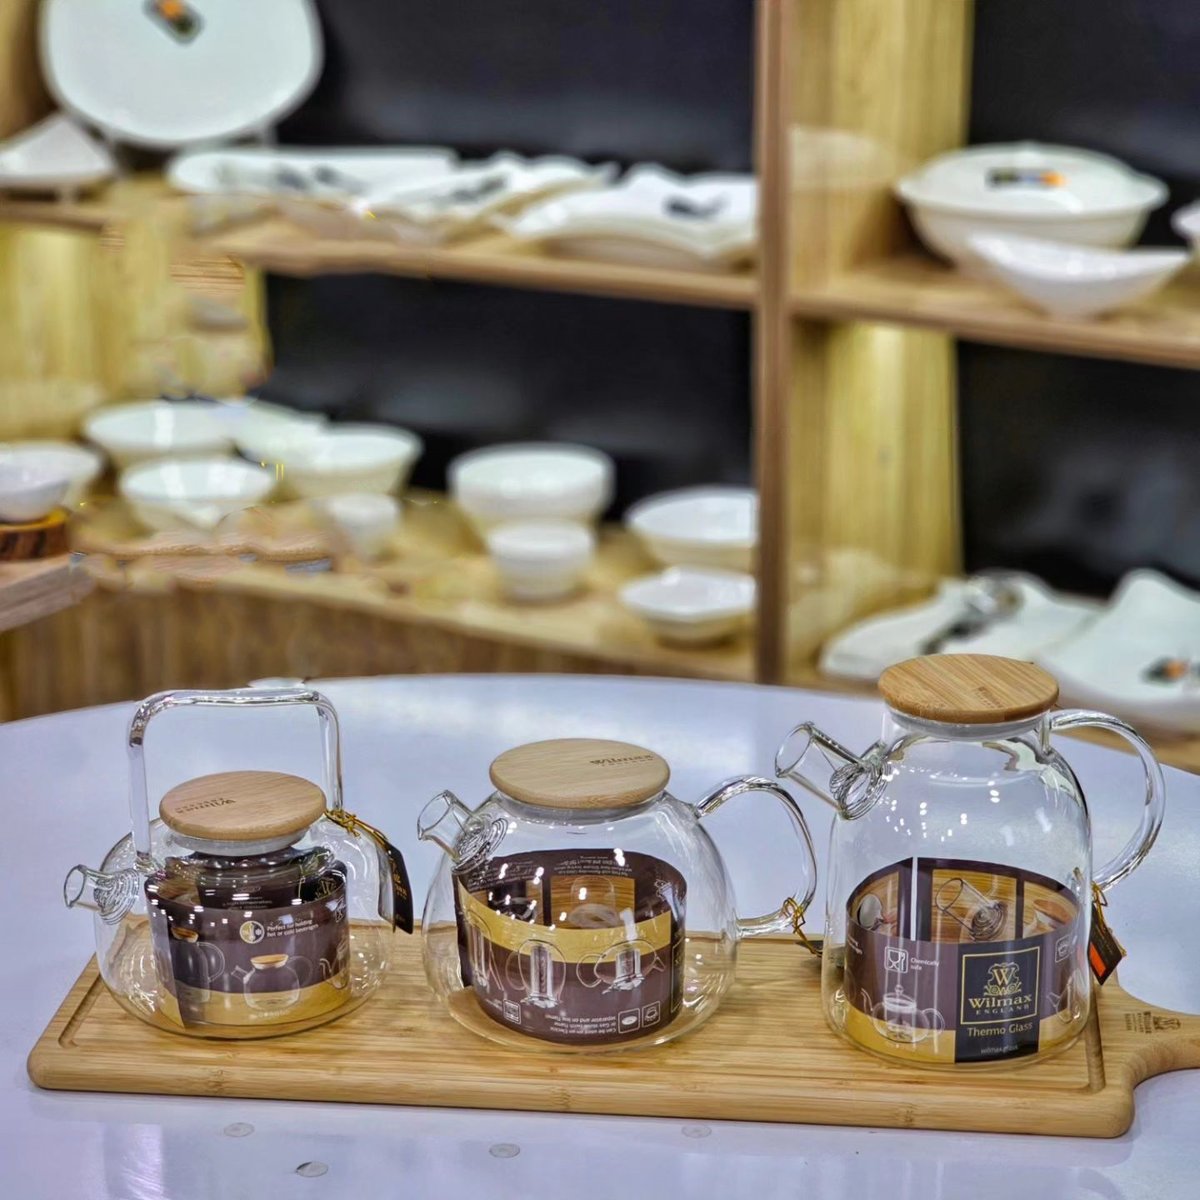 The Thermo Glass collection by WILMAX is perfect for preparing and serving your favorite tea.
#ThermoGlass #tableware #wilmaxusa #teaware #tea